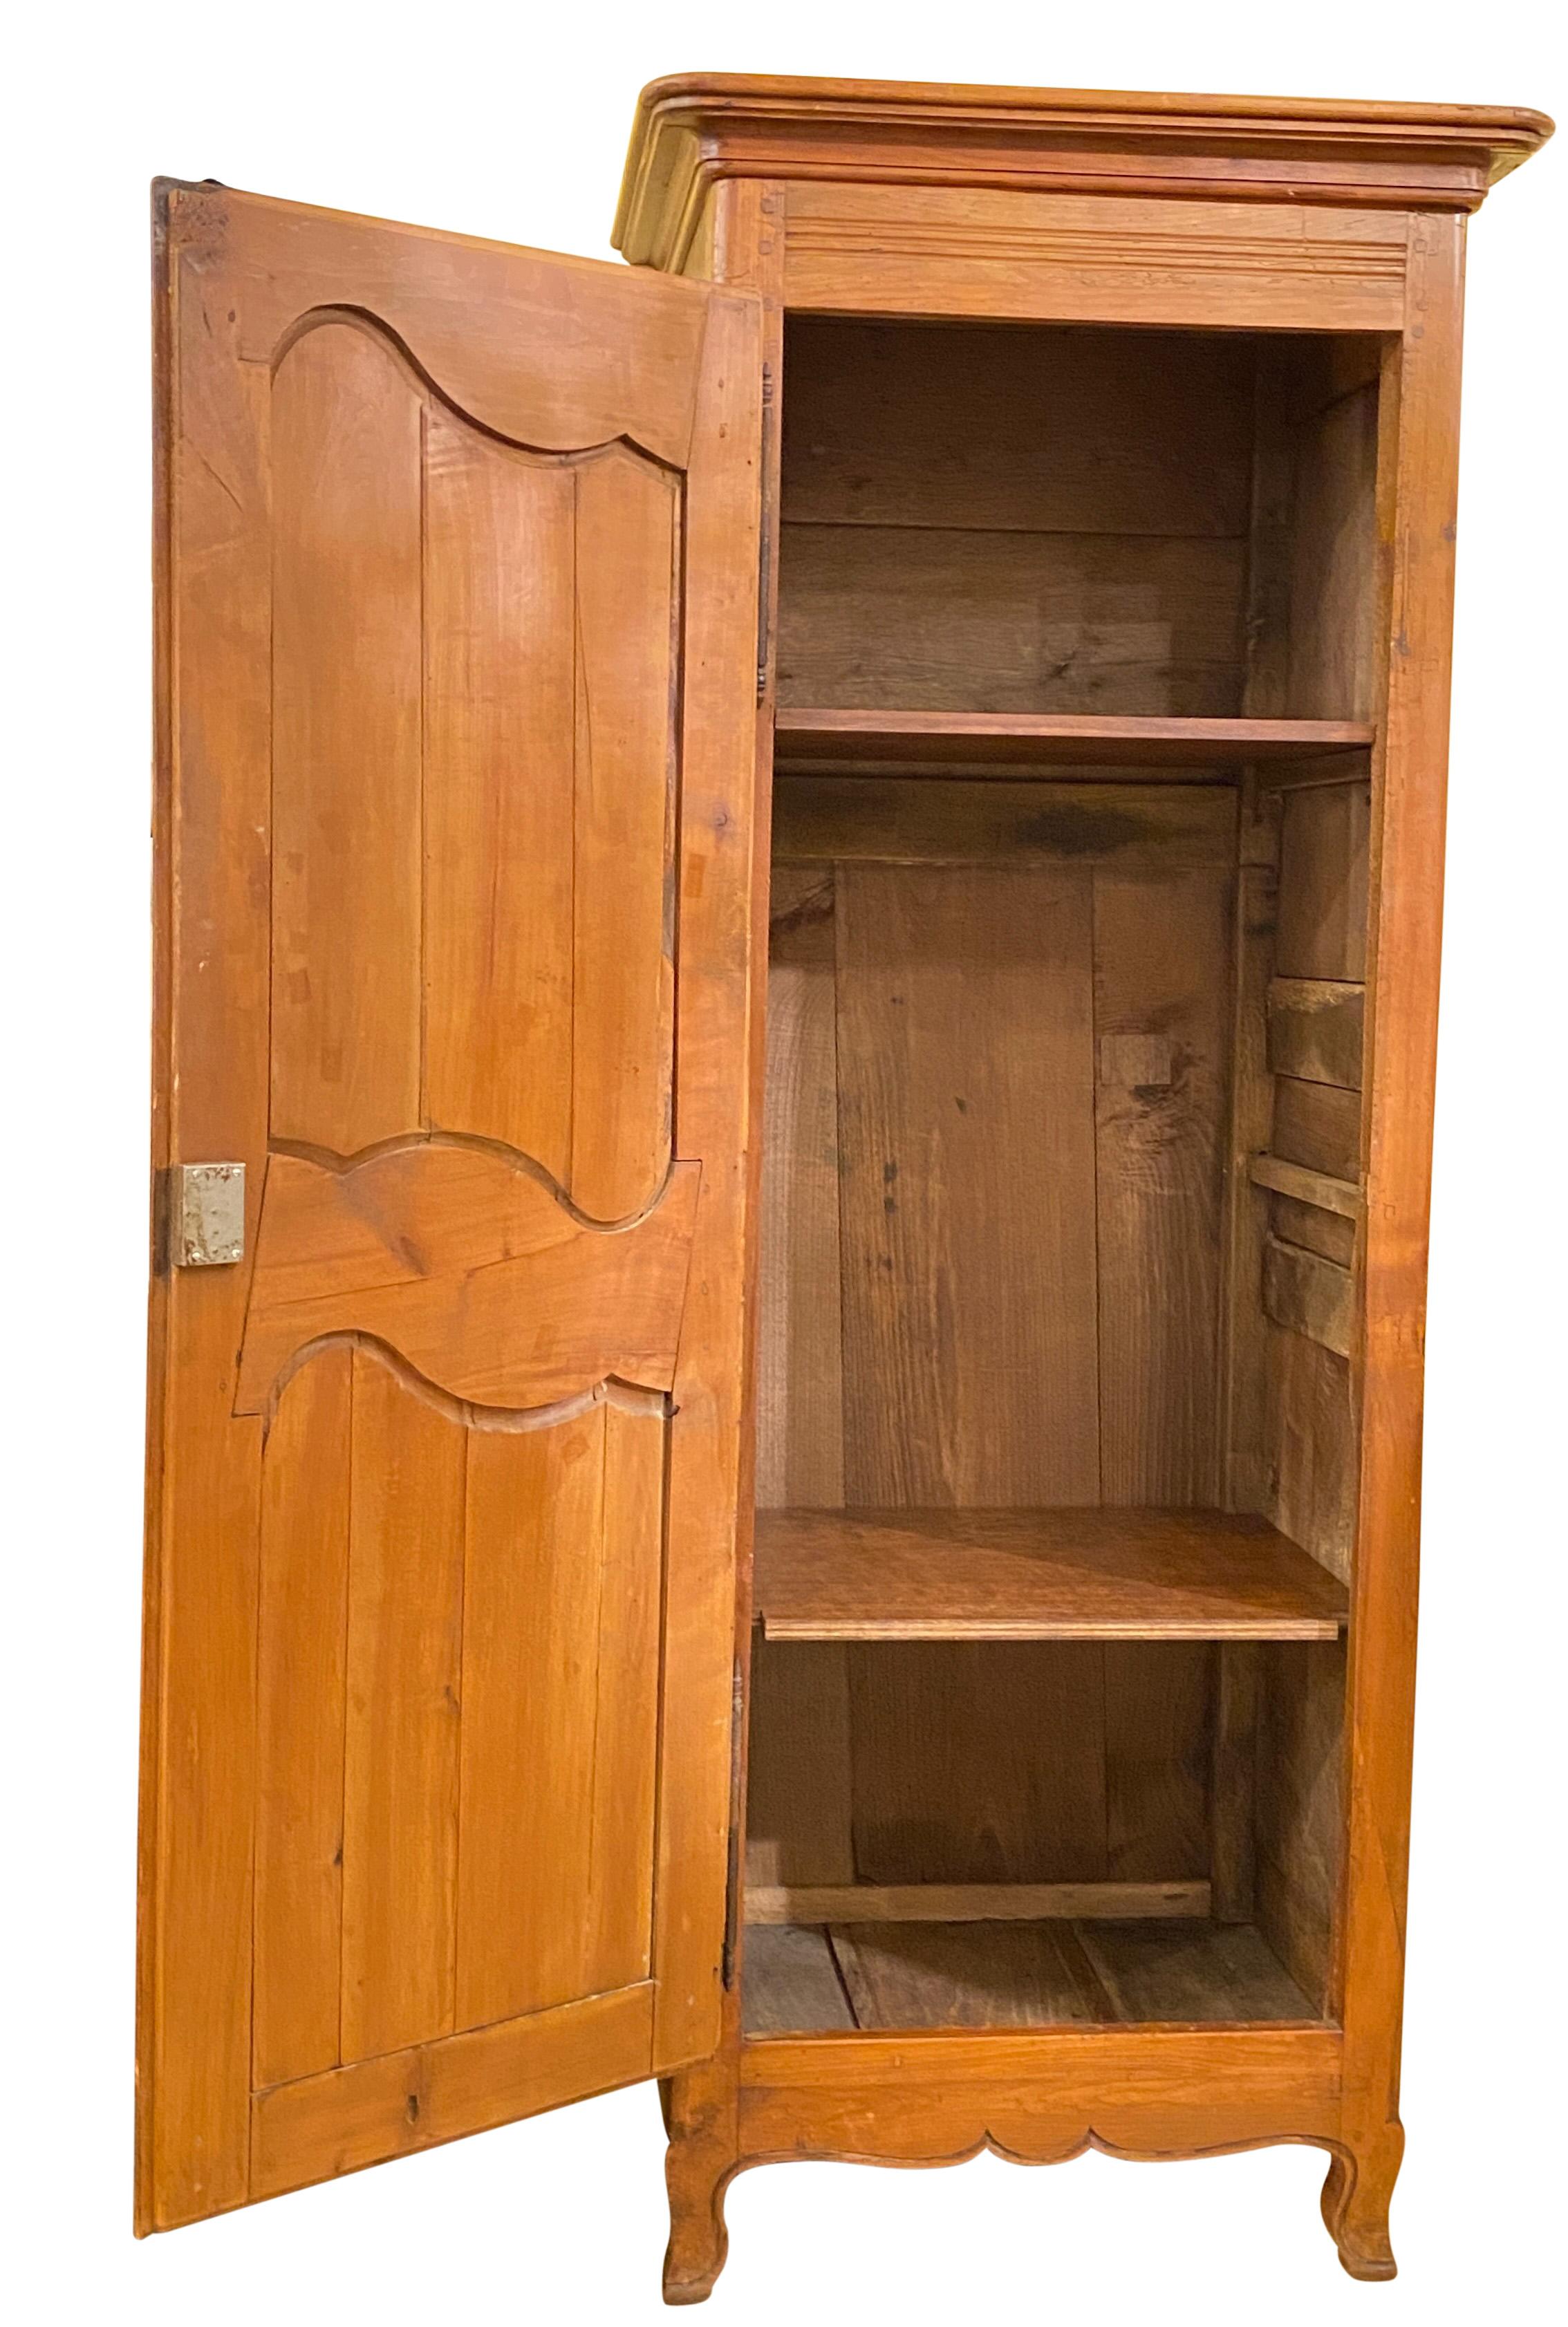 18th Century French Cherry Wood Bonnetiere Hat Cabinet In Good Condition For Sale In San Francisco, CA